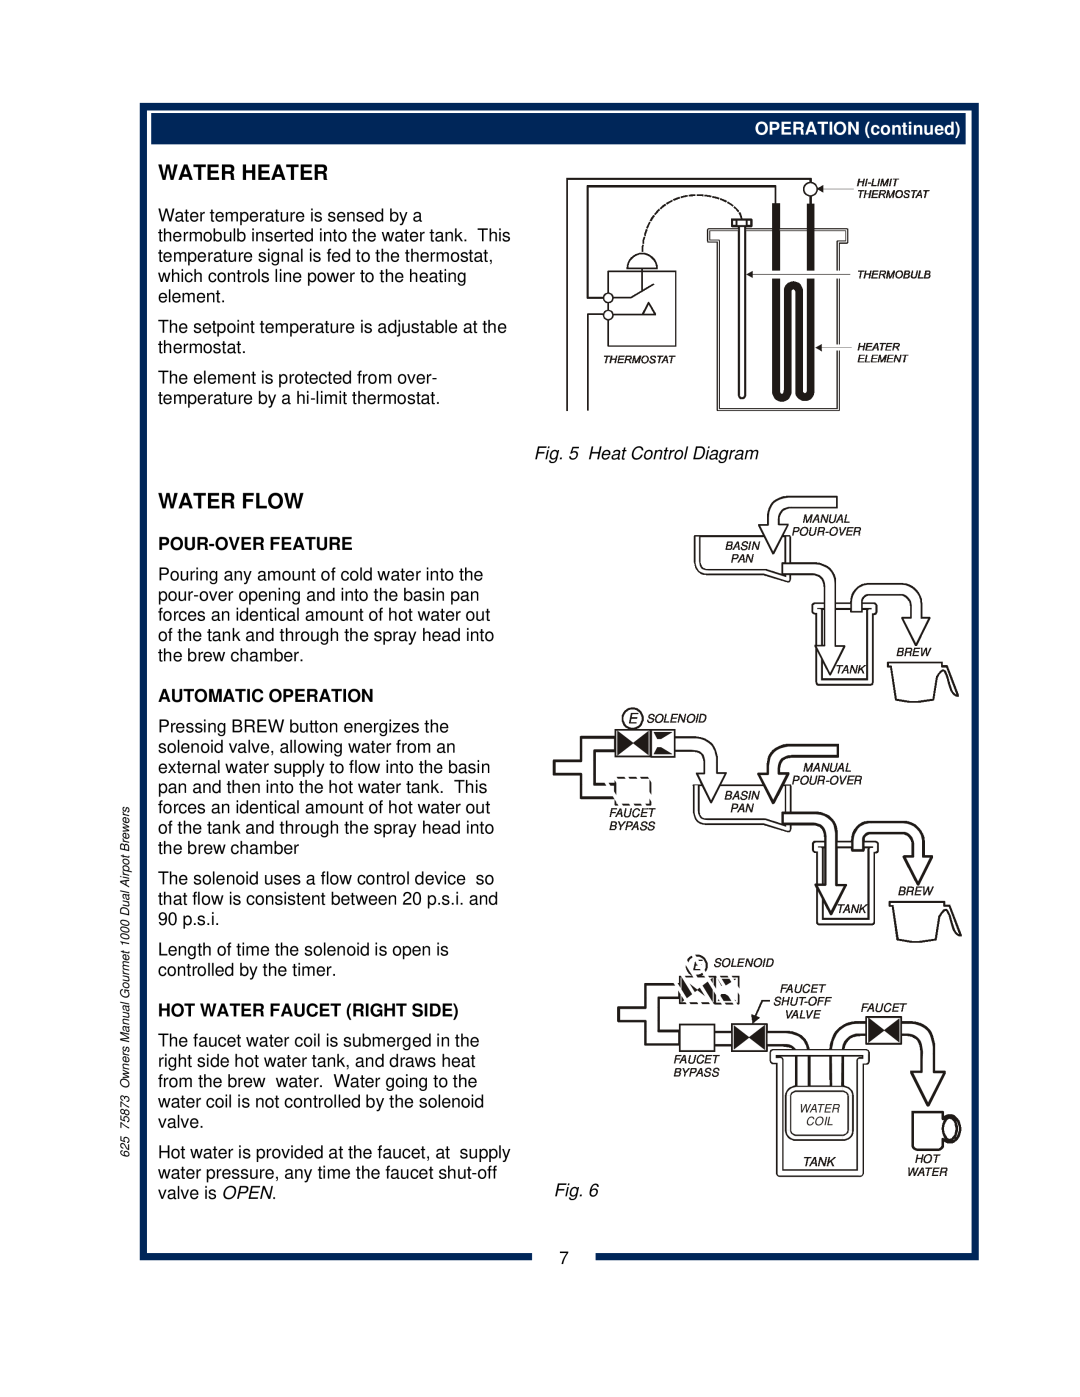 Bloomfield 8792 Water Heater, Water Flow, OPERATION continued, Pour-Overfeature, Automatic Operation, Heat Control Diagram 